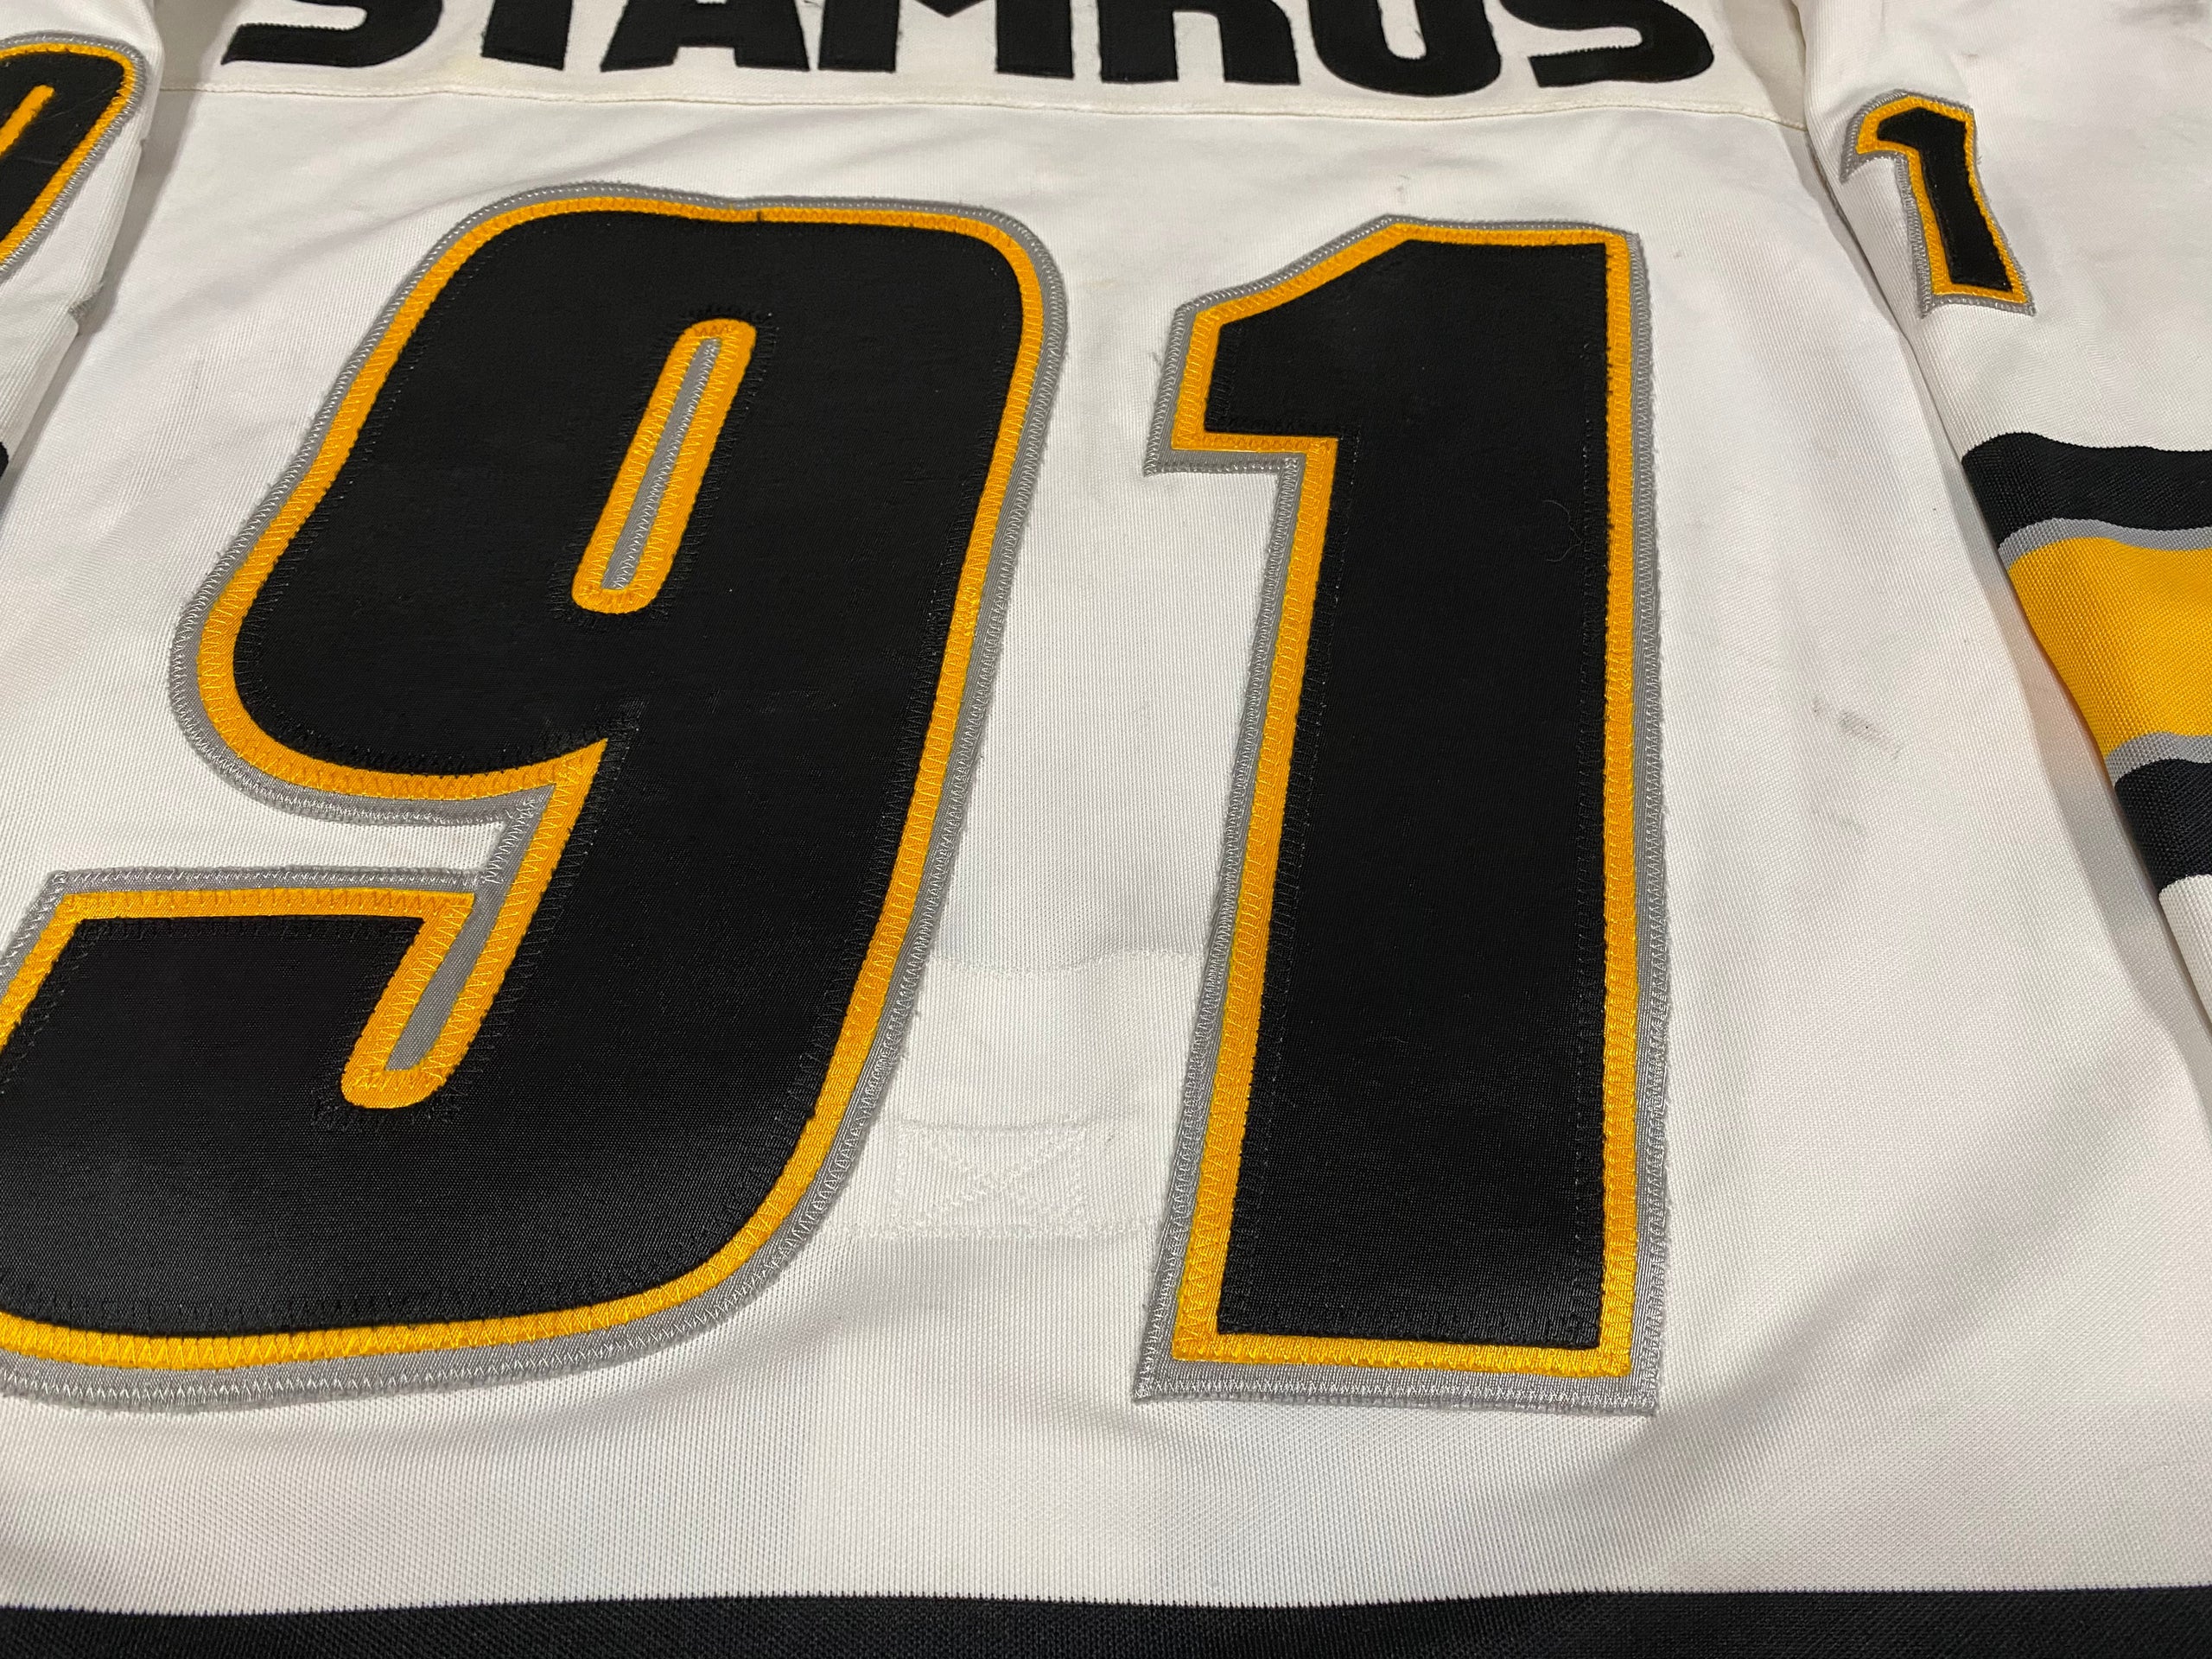 Sting to Release Remaining Tickets to Steven Stamkos Jersey